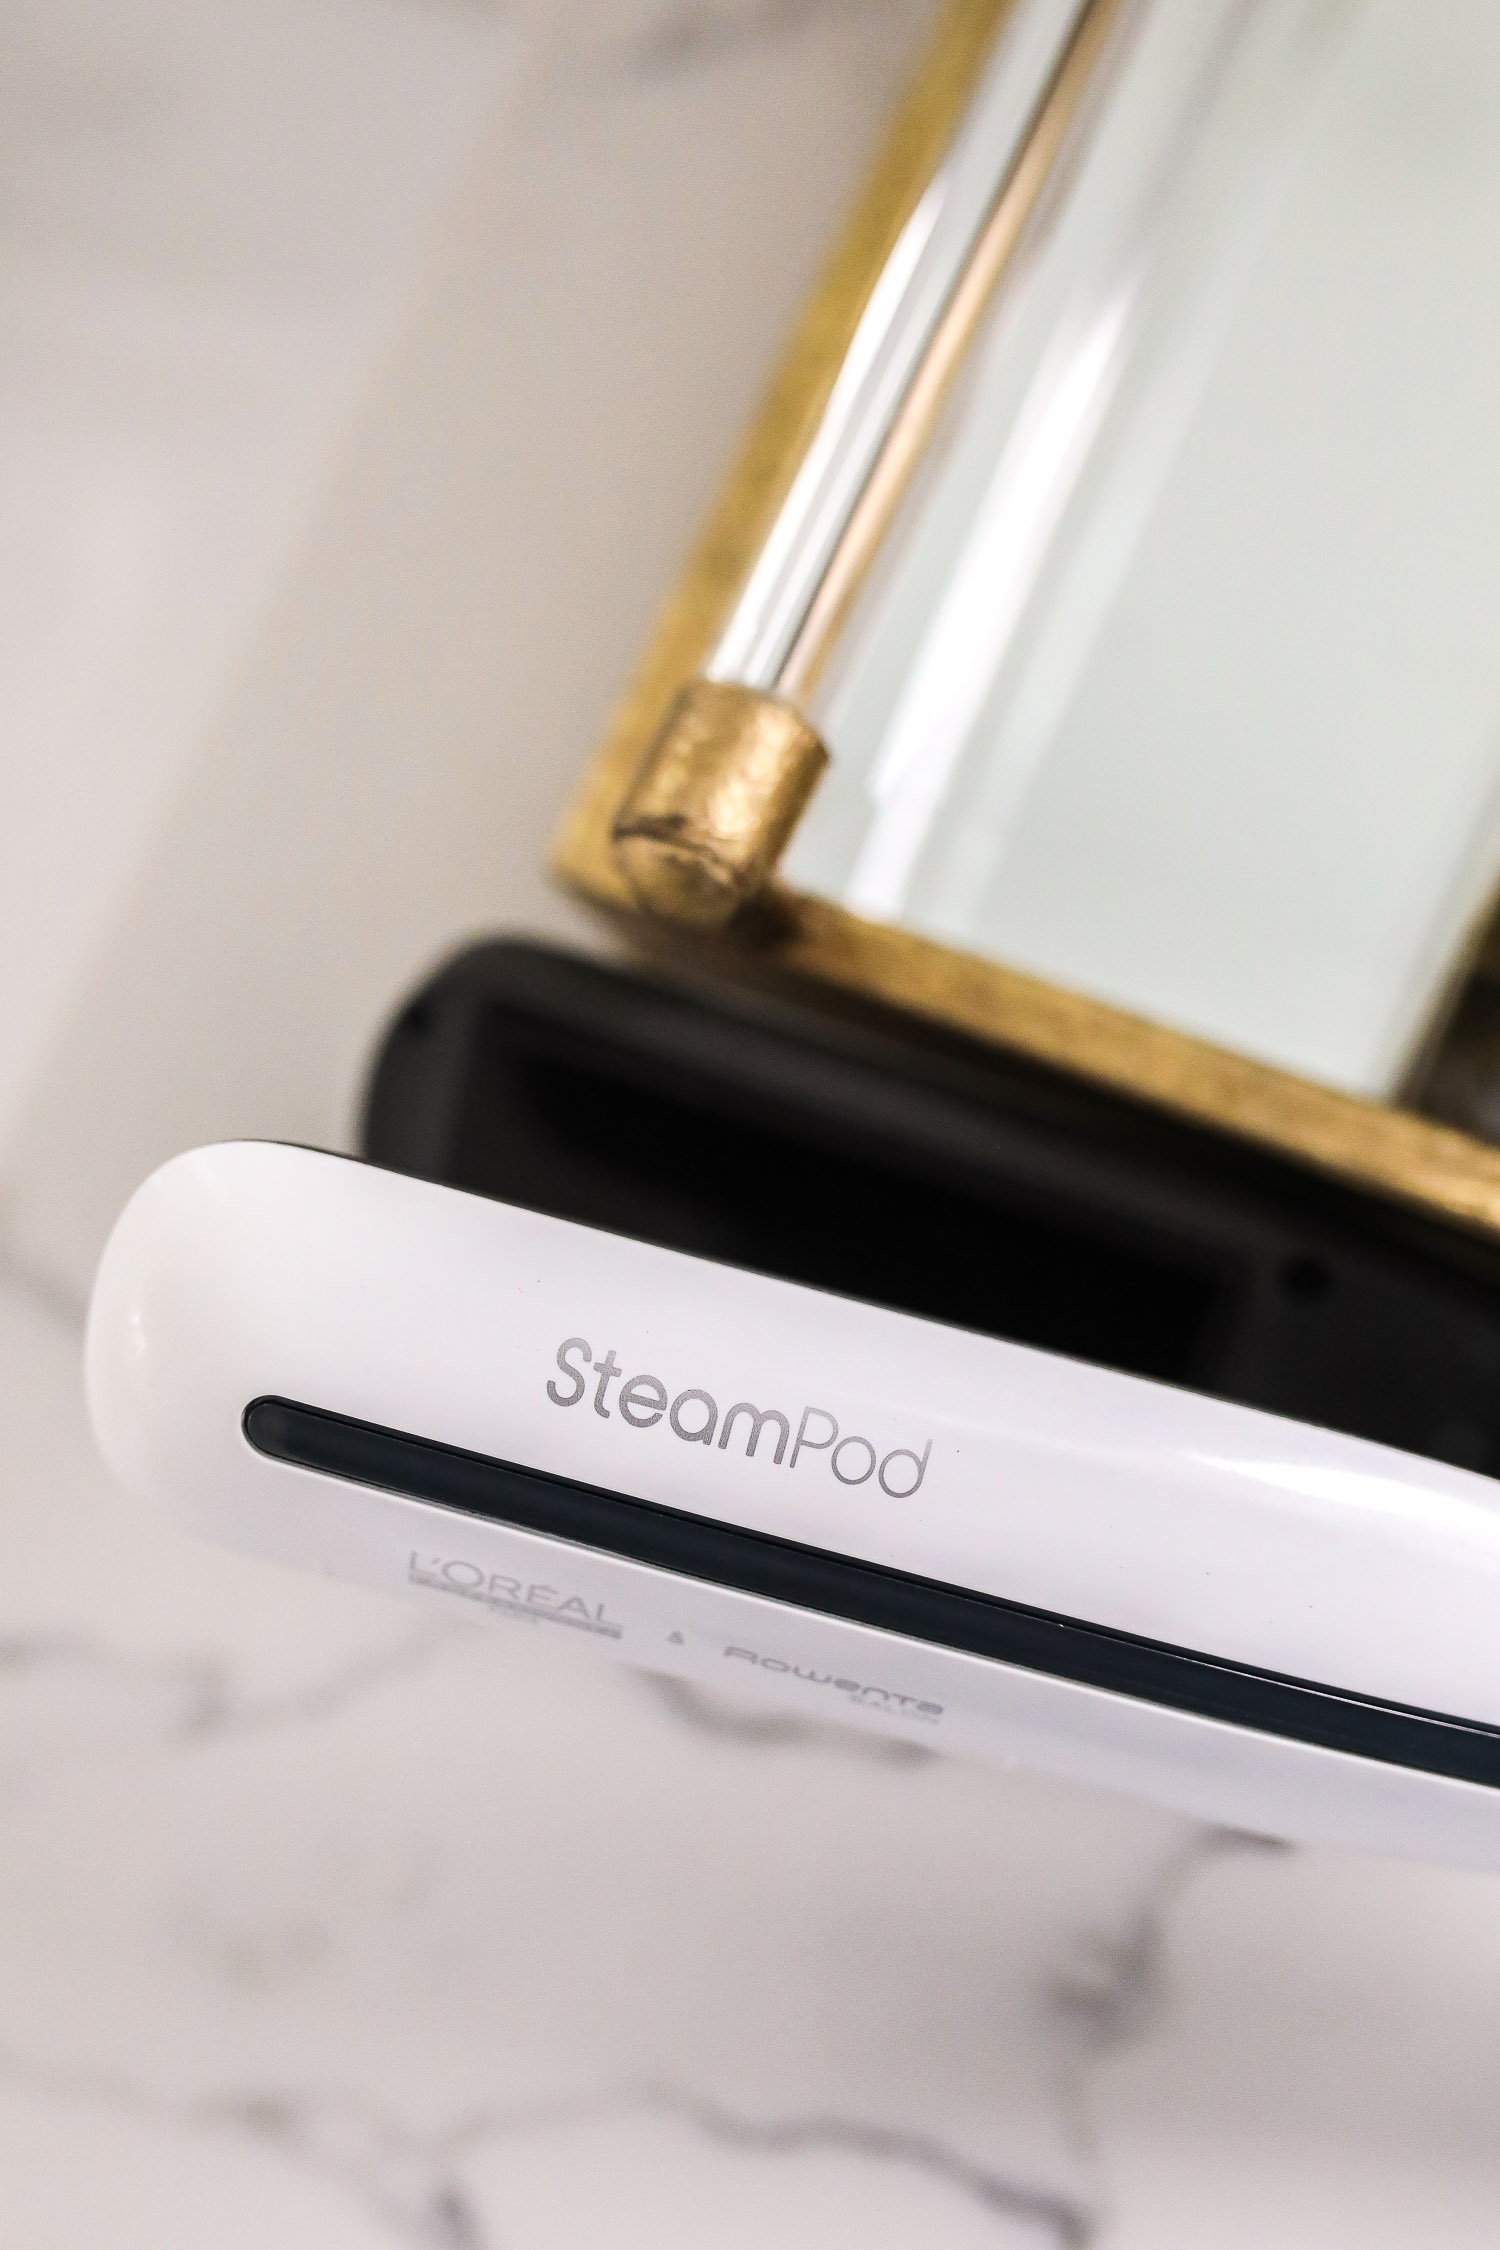 steampod rowenta loreal, steampod Review rowenta, emily gemma, best straighening product, The Sweetest Thing blog hair |L'oreal Professional Steampod Hair Straightener by popular US beauty blog, The Sweetest Thing: image of a L'oreal Professional Steampod Hair Straightener.